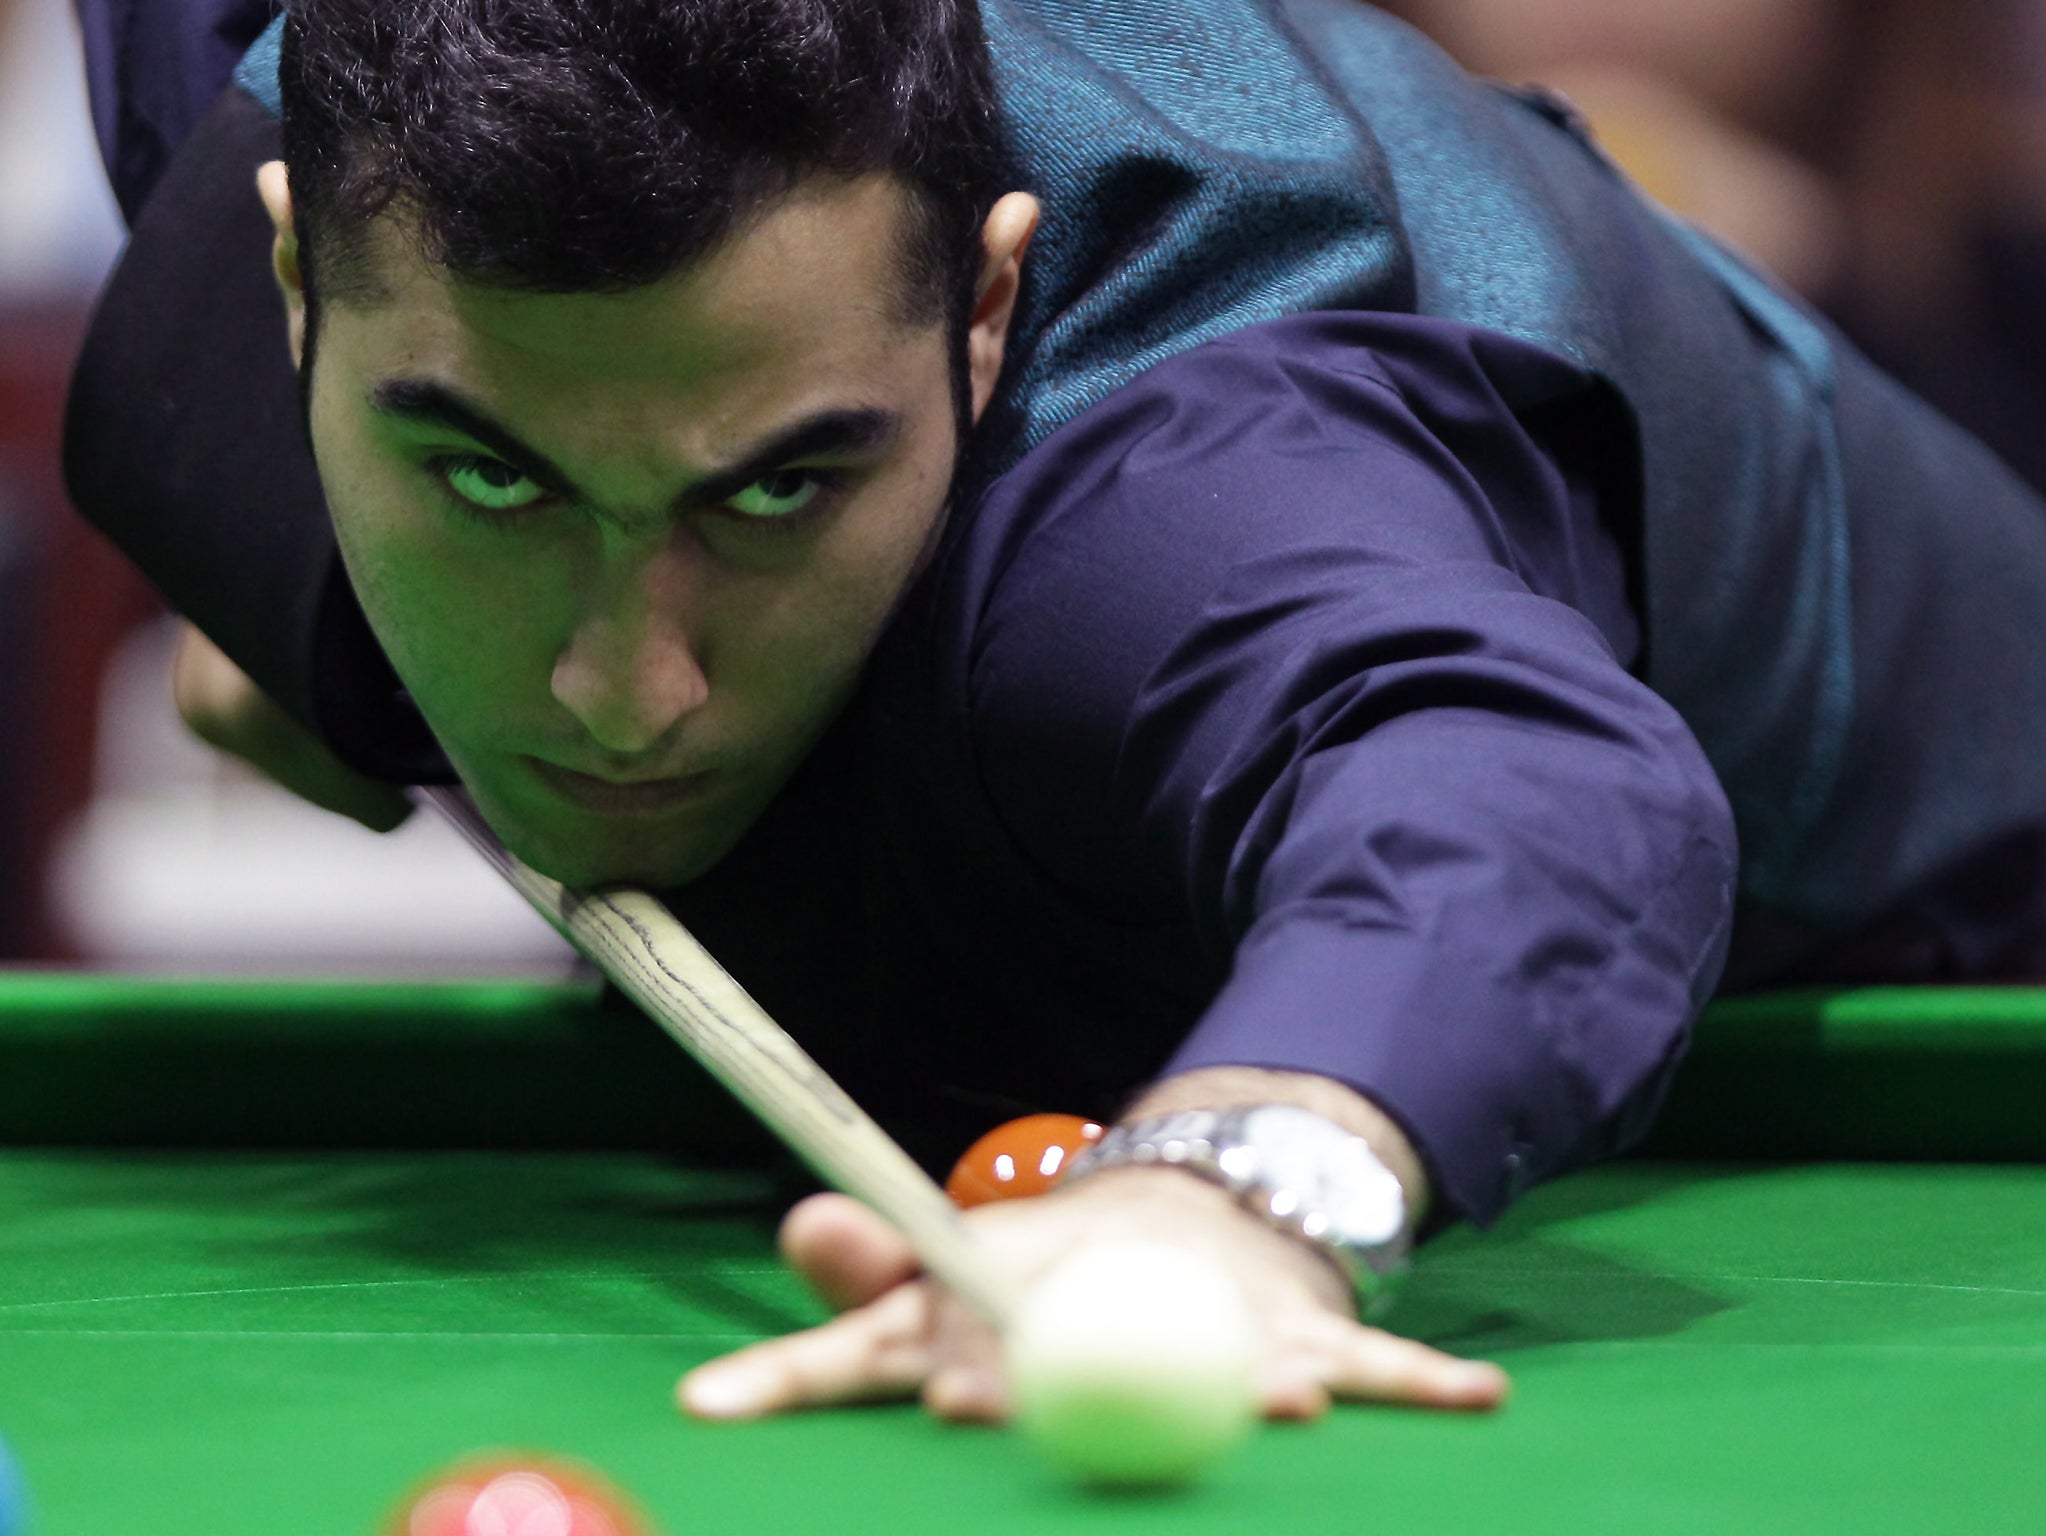 The 23-year-old wants to see more Iranians playing snooker